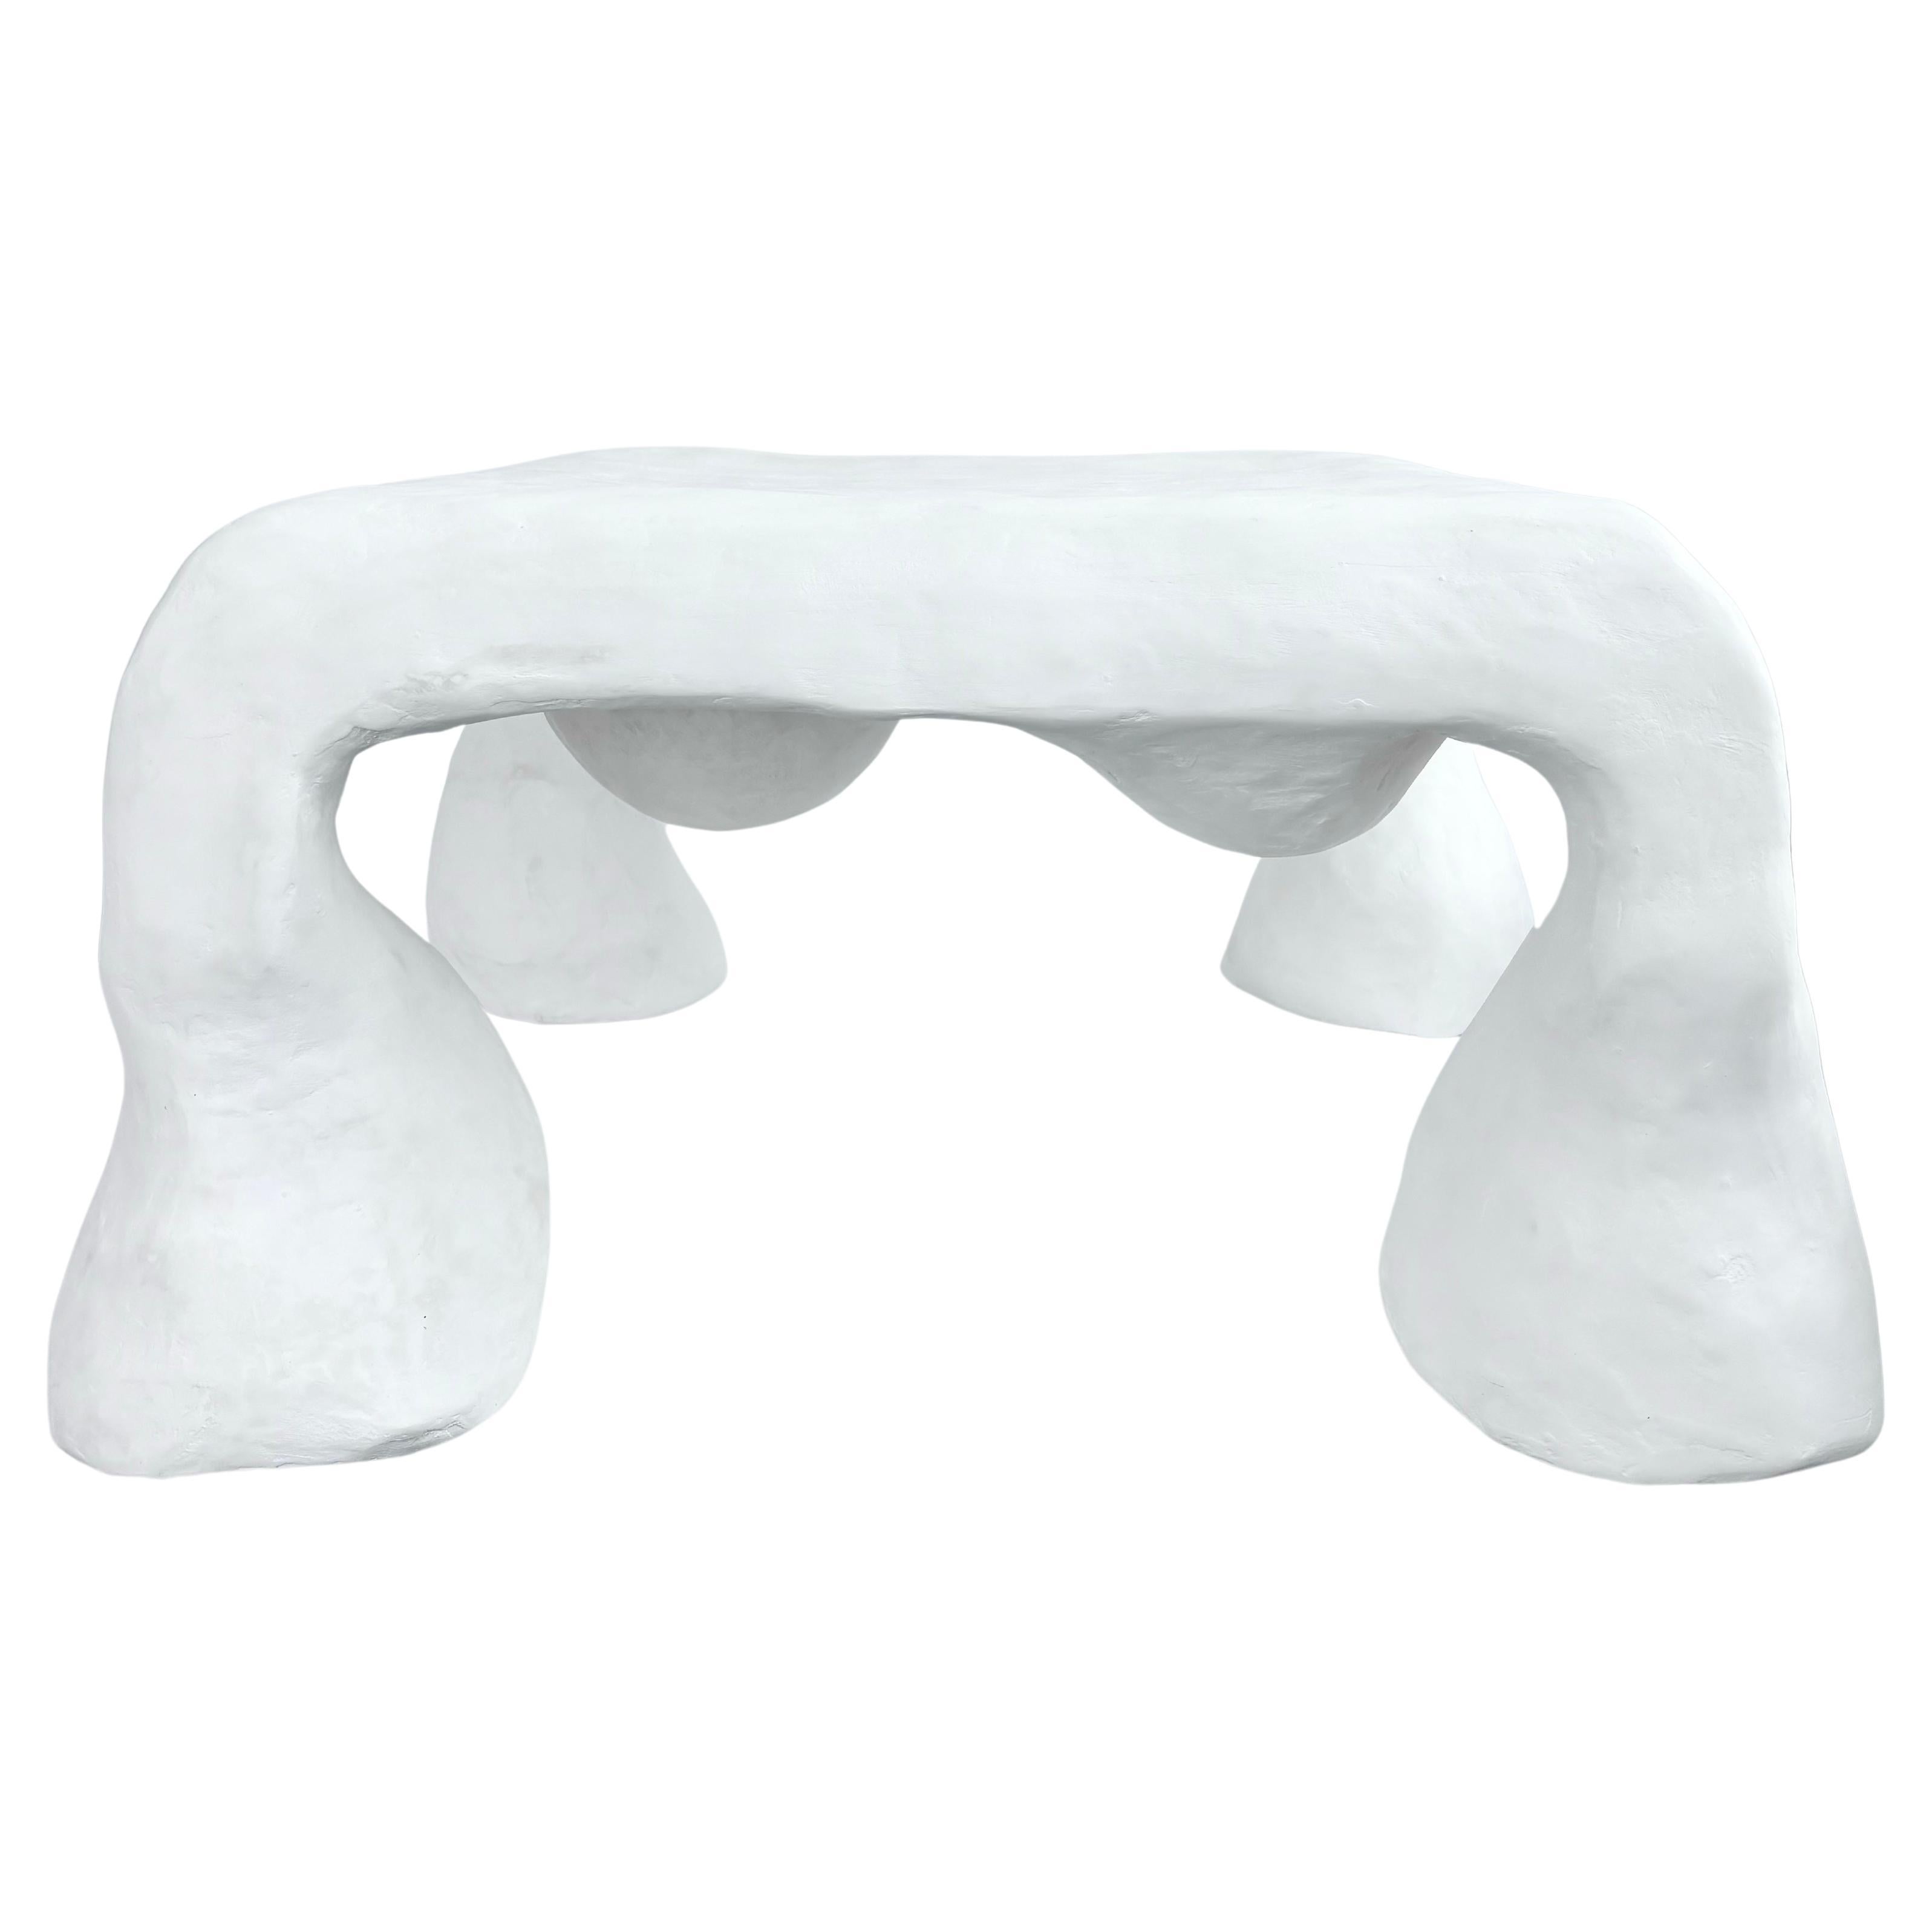 Organic Modern Biomorphic Line by Studio Chora, White Coffee Table, Lime Plaster, In Stock For Sale